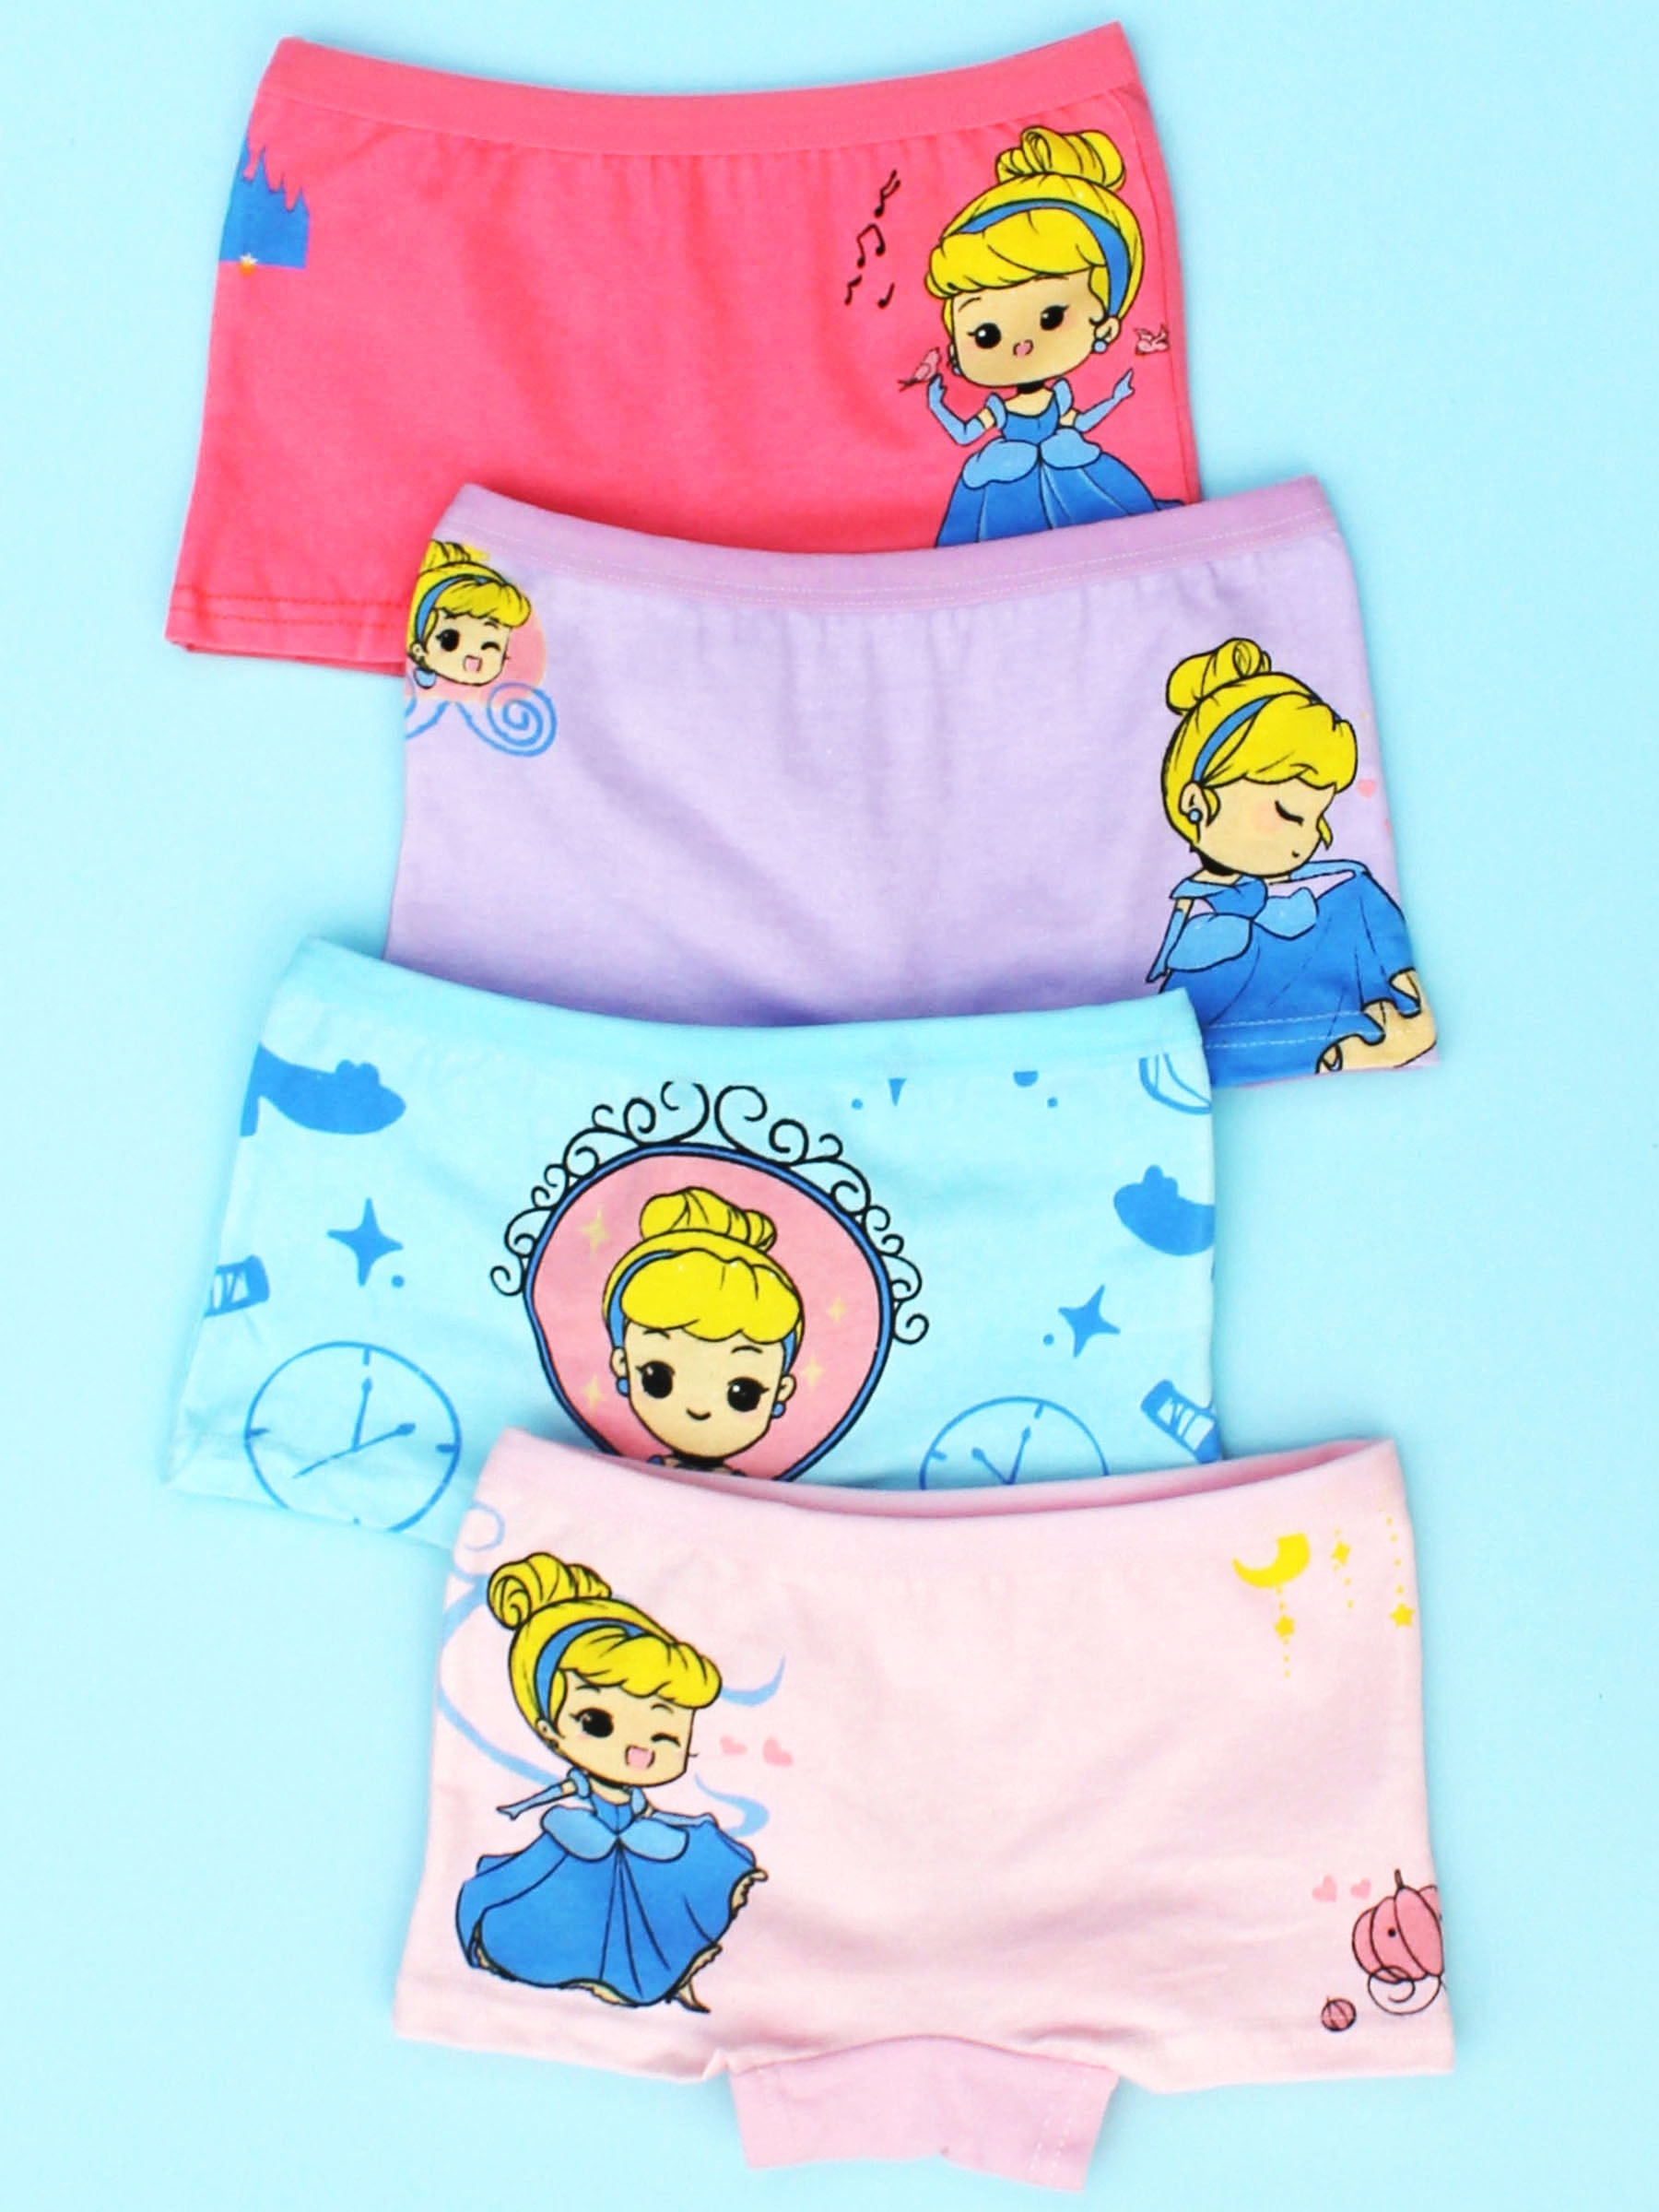  NEIYISHE Girls Cotton Brief Breathable Toddler Panties Kids  Assorted,fo Girls Underwear Size 2t 3t 4t 5t 6t 7t 8t 9t 10t 11t 12t